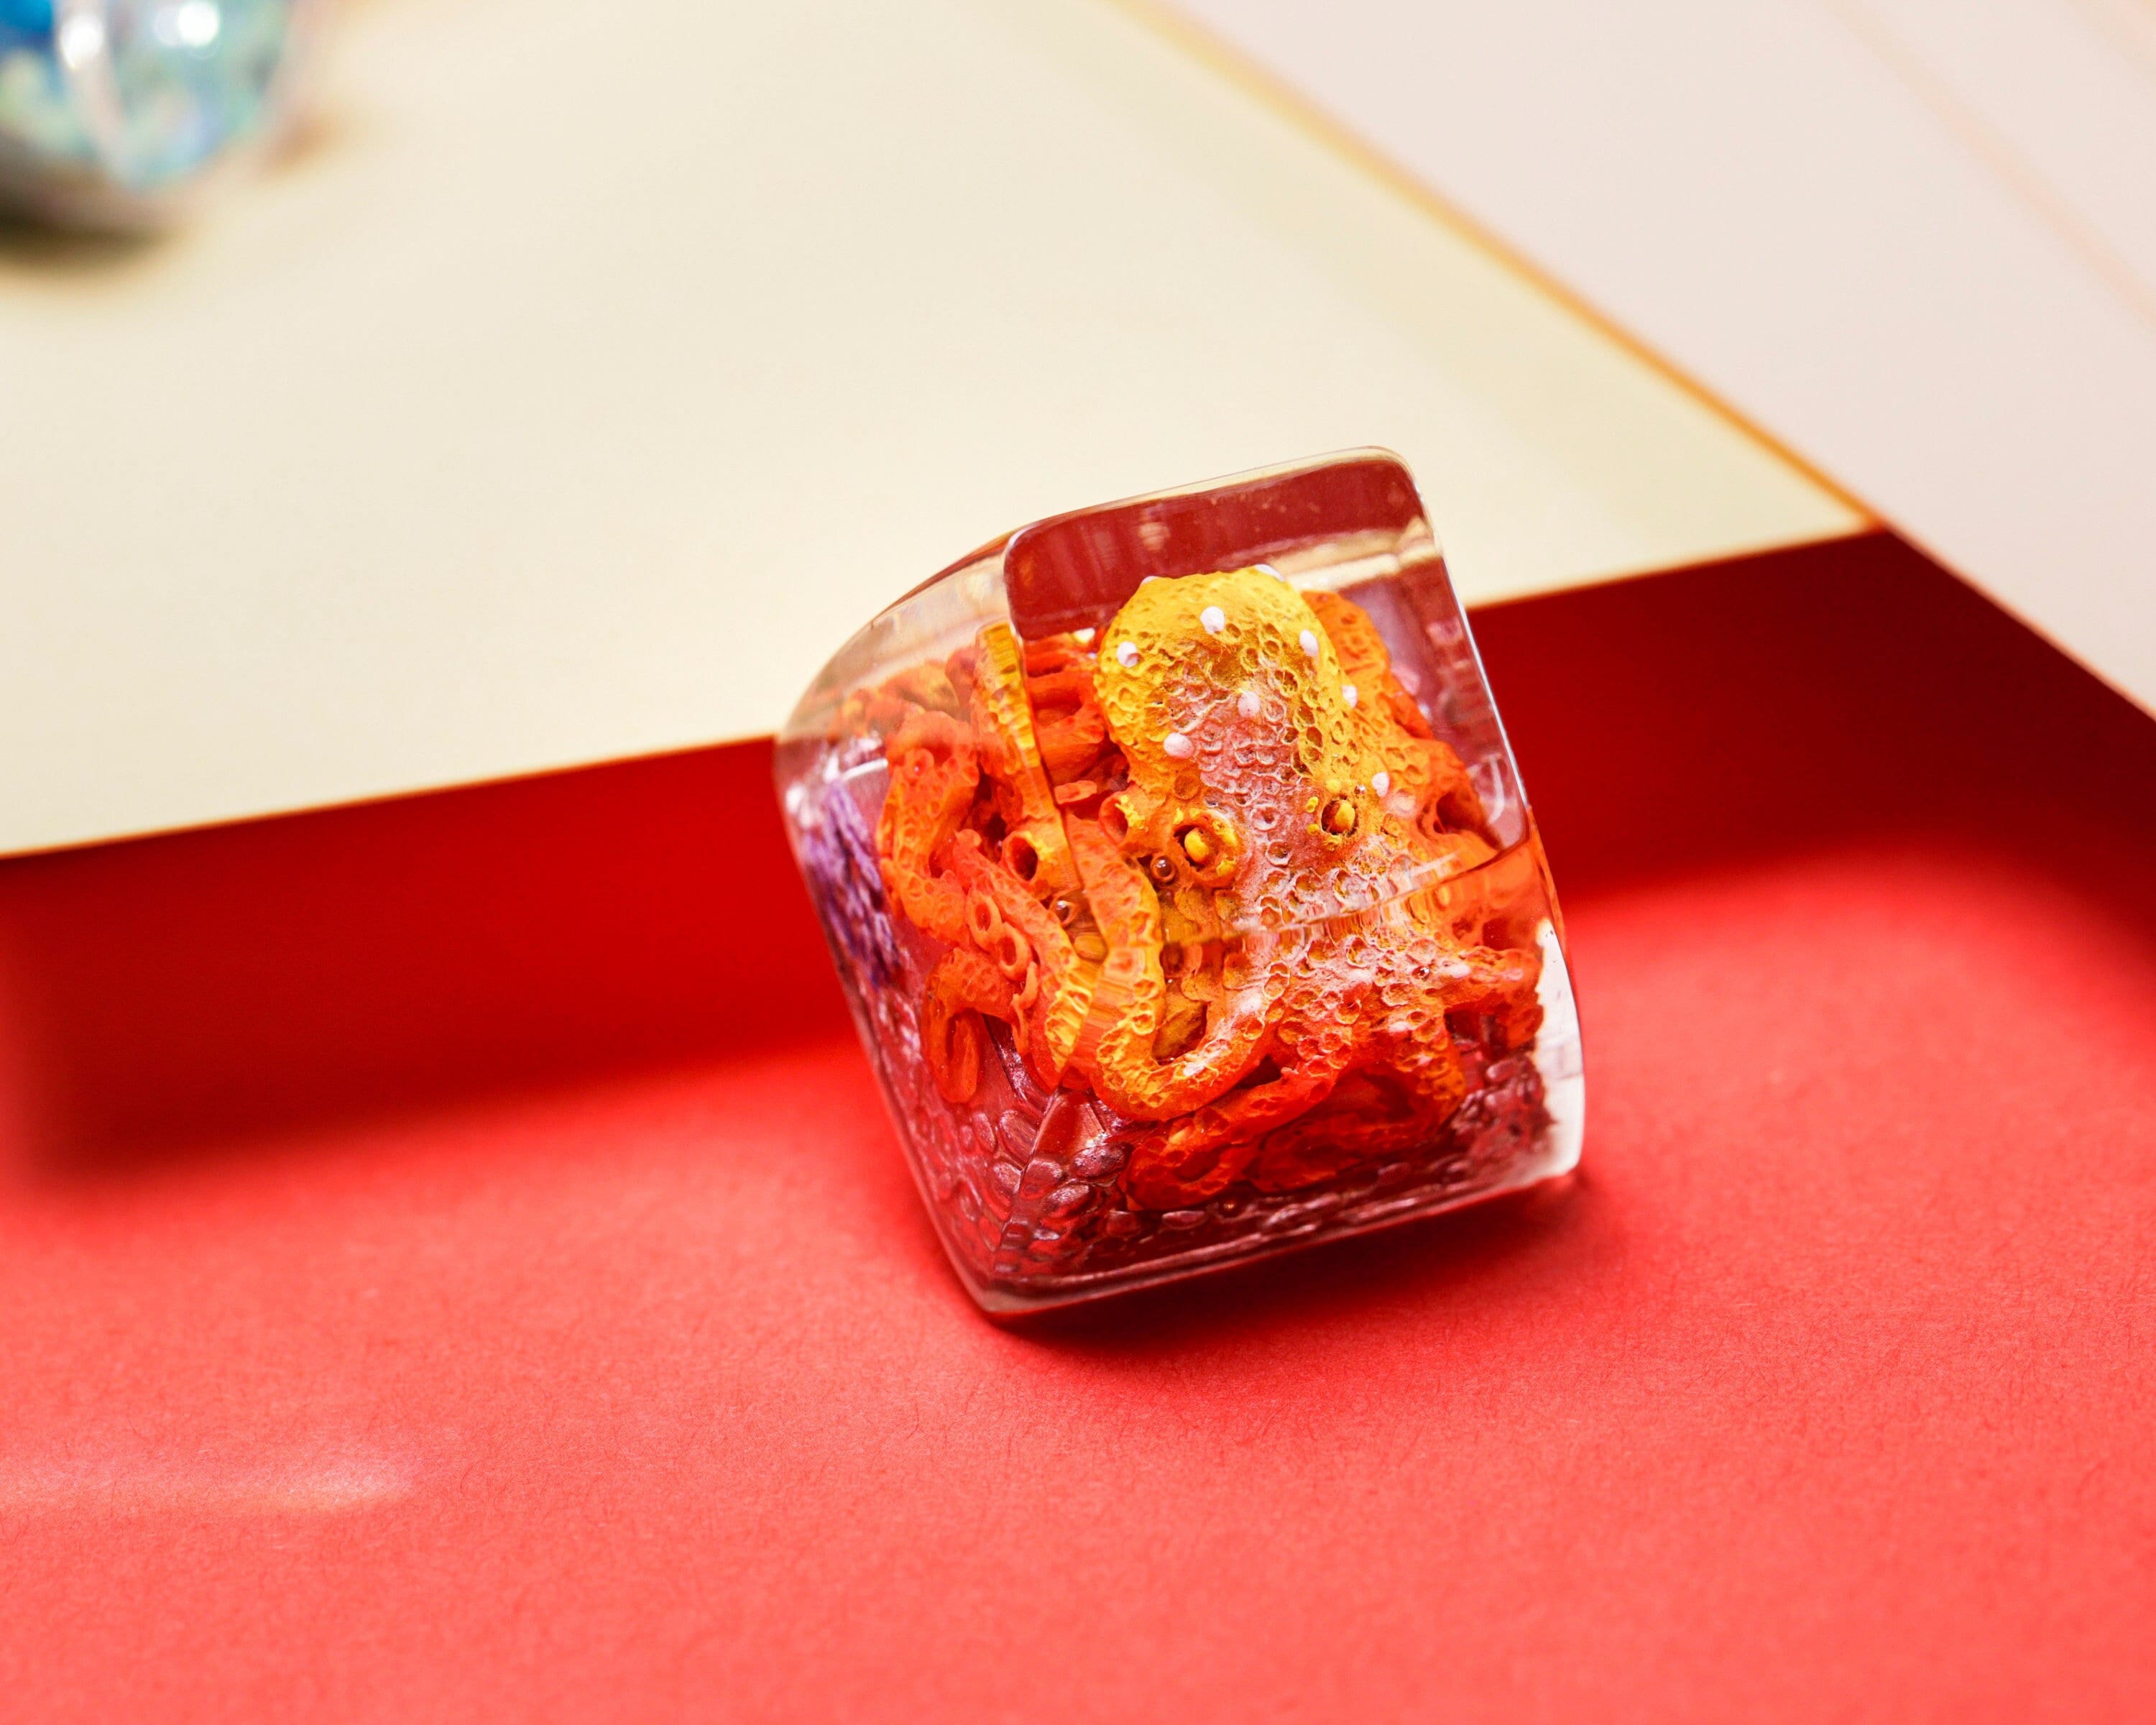 Artisan Keycap Fire Octopus Keycap For Cherry MX Switches Mechanical Keyboard Gift for him